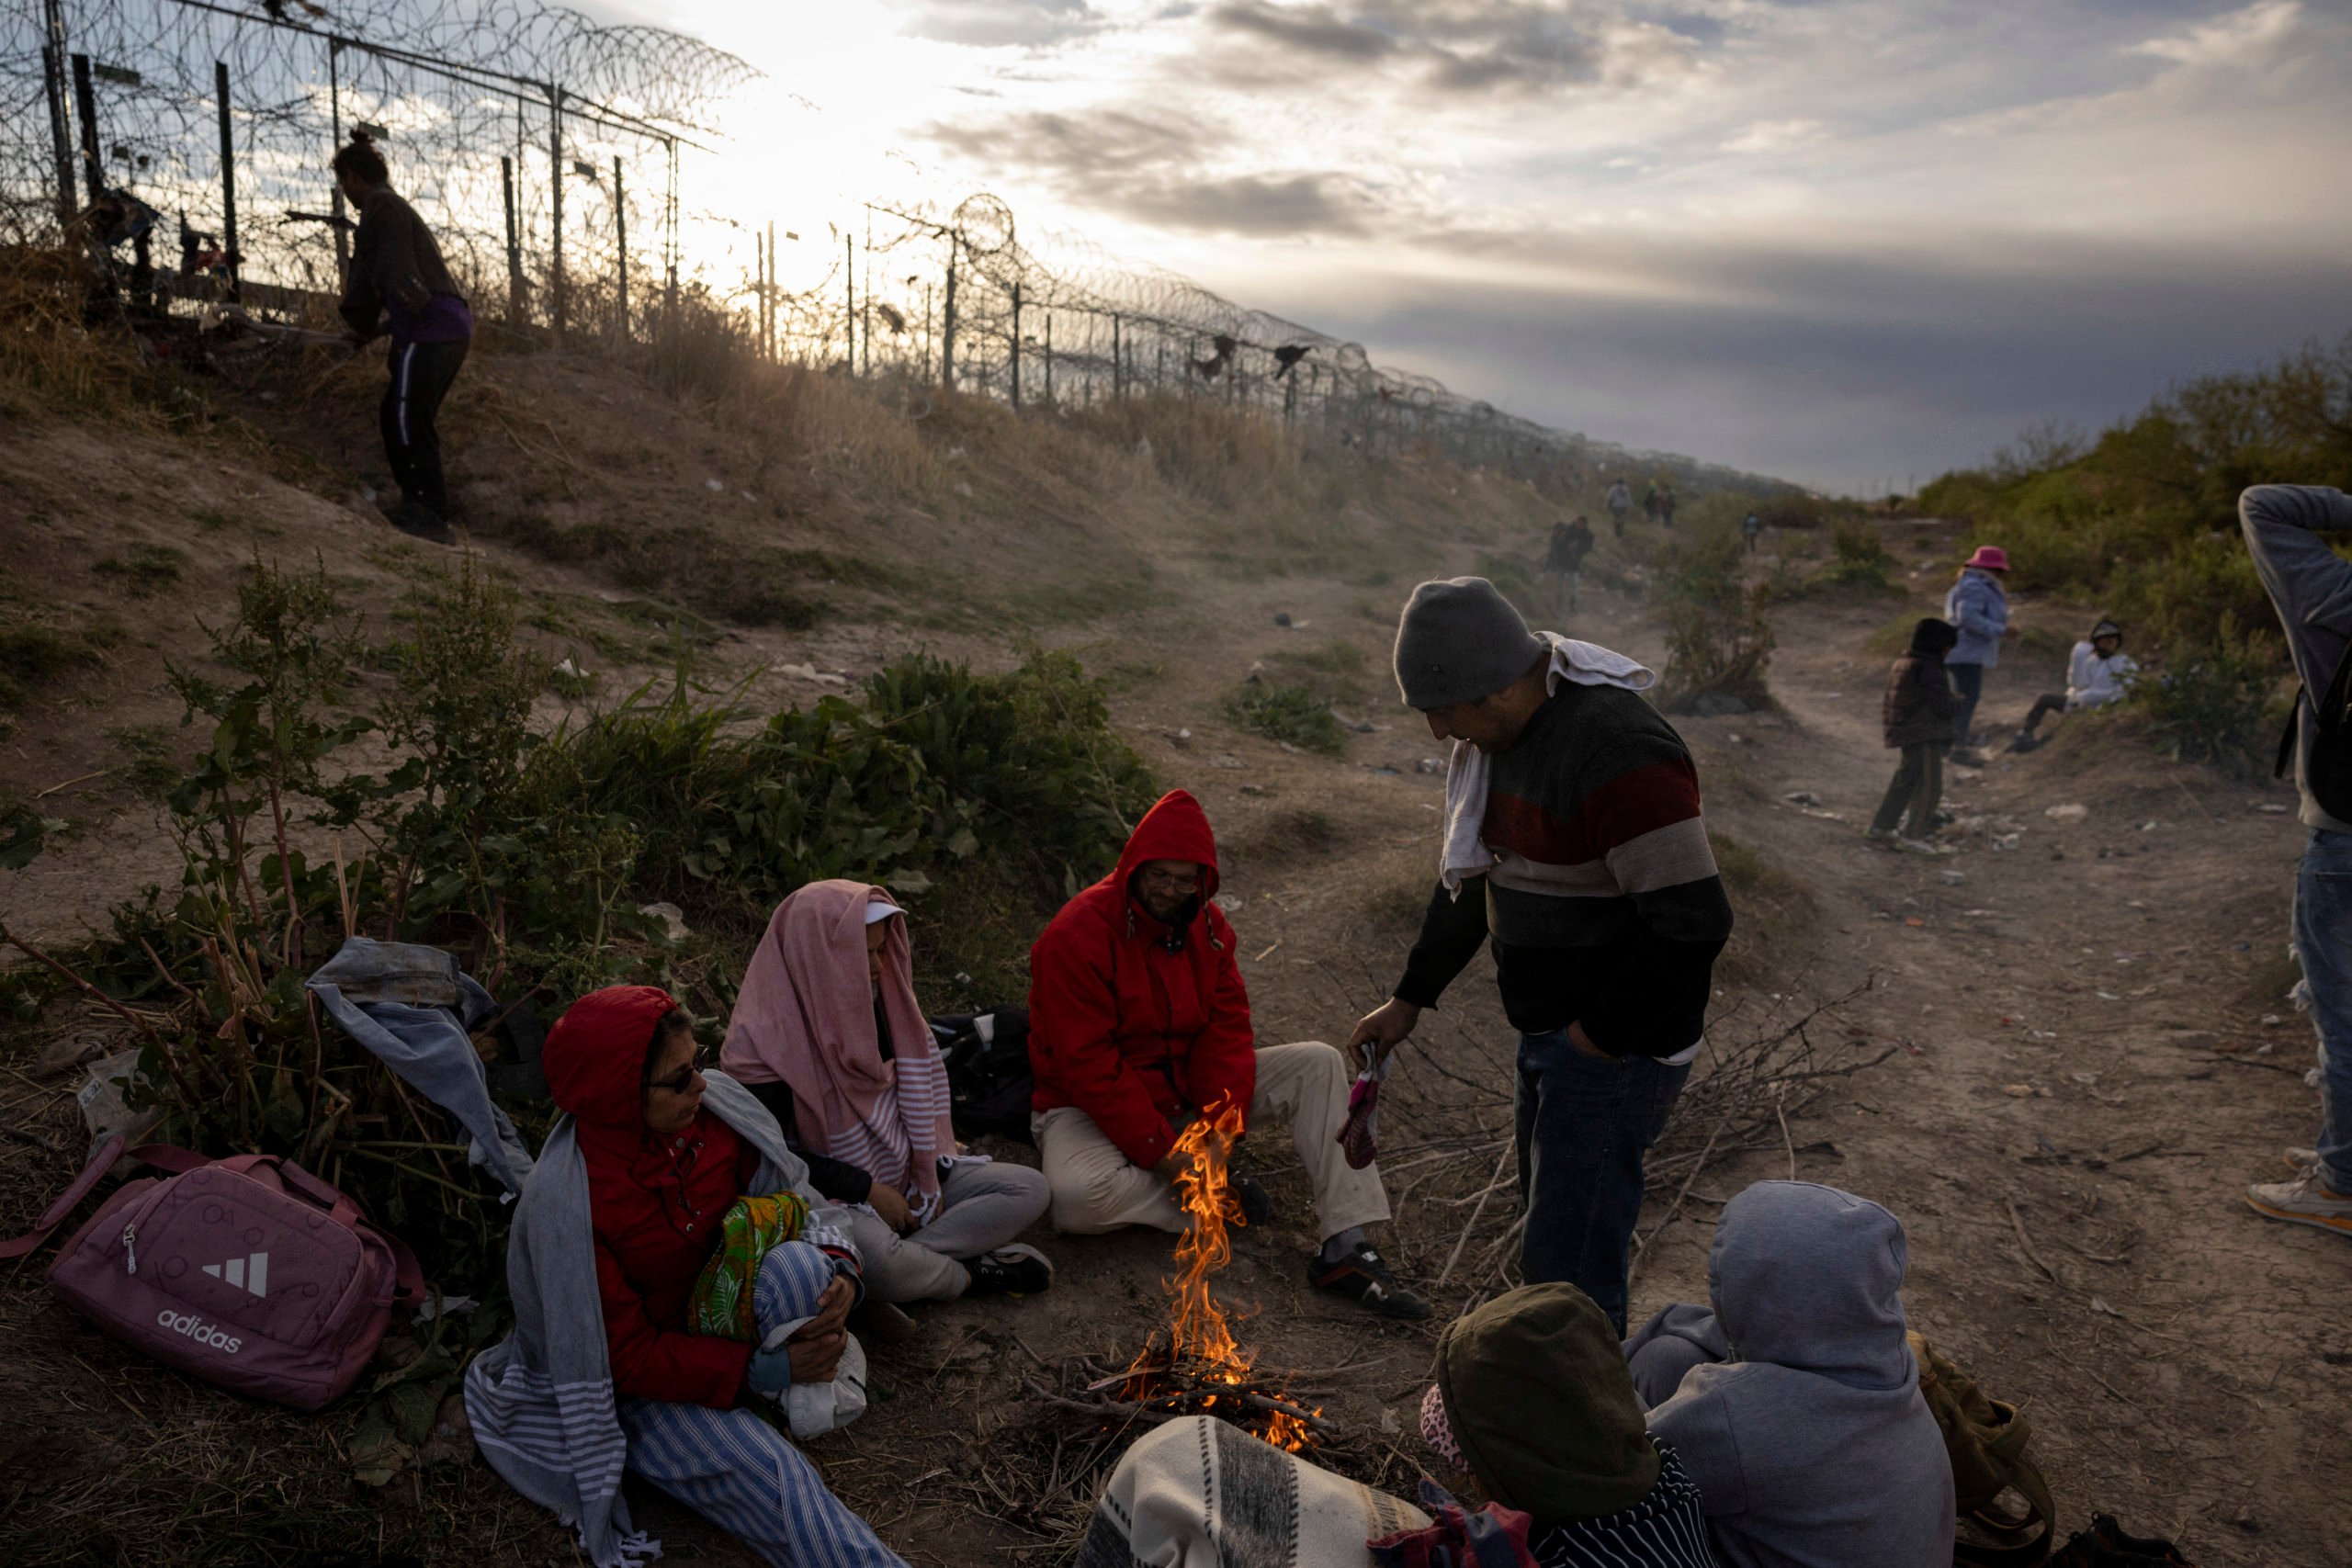 EDITORS NOTE: Graphic content / Migrants from Venezuela sit by a makeshift fire to warm up as they wait to enter and seek asylum in El Paso, Texas from Ciudad Juarez, Chihuahua, Mexico on April 2, 2024. An appeals court is scheduled to hear arguments on the constitutionality of Senate Bill 4 that would allow state law enforcement officials to detain and arrest undocumented immigrants suspected of illegally crossing into the United States. (Photo by CHRISTIAN MONTERROSA/AFP via Getty Images)